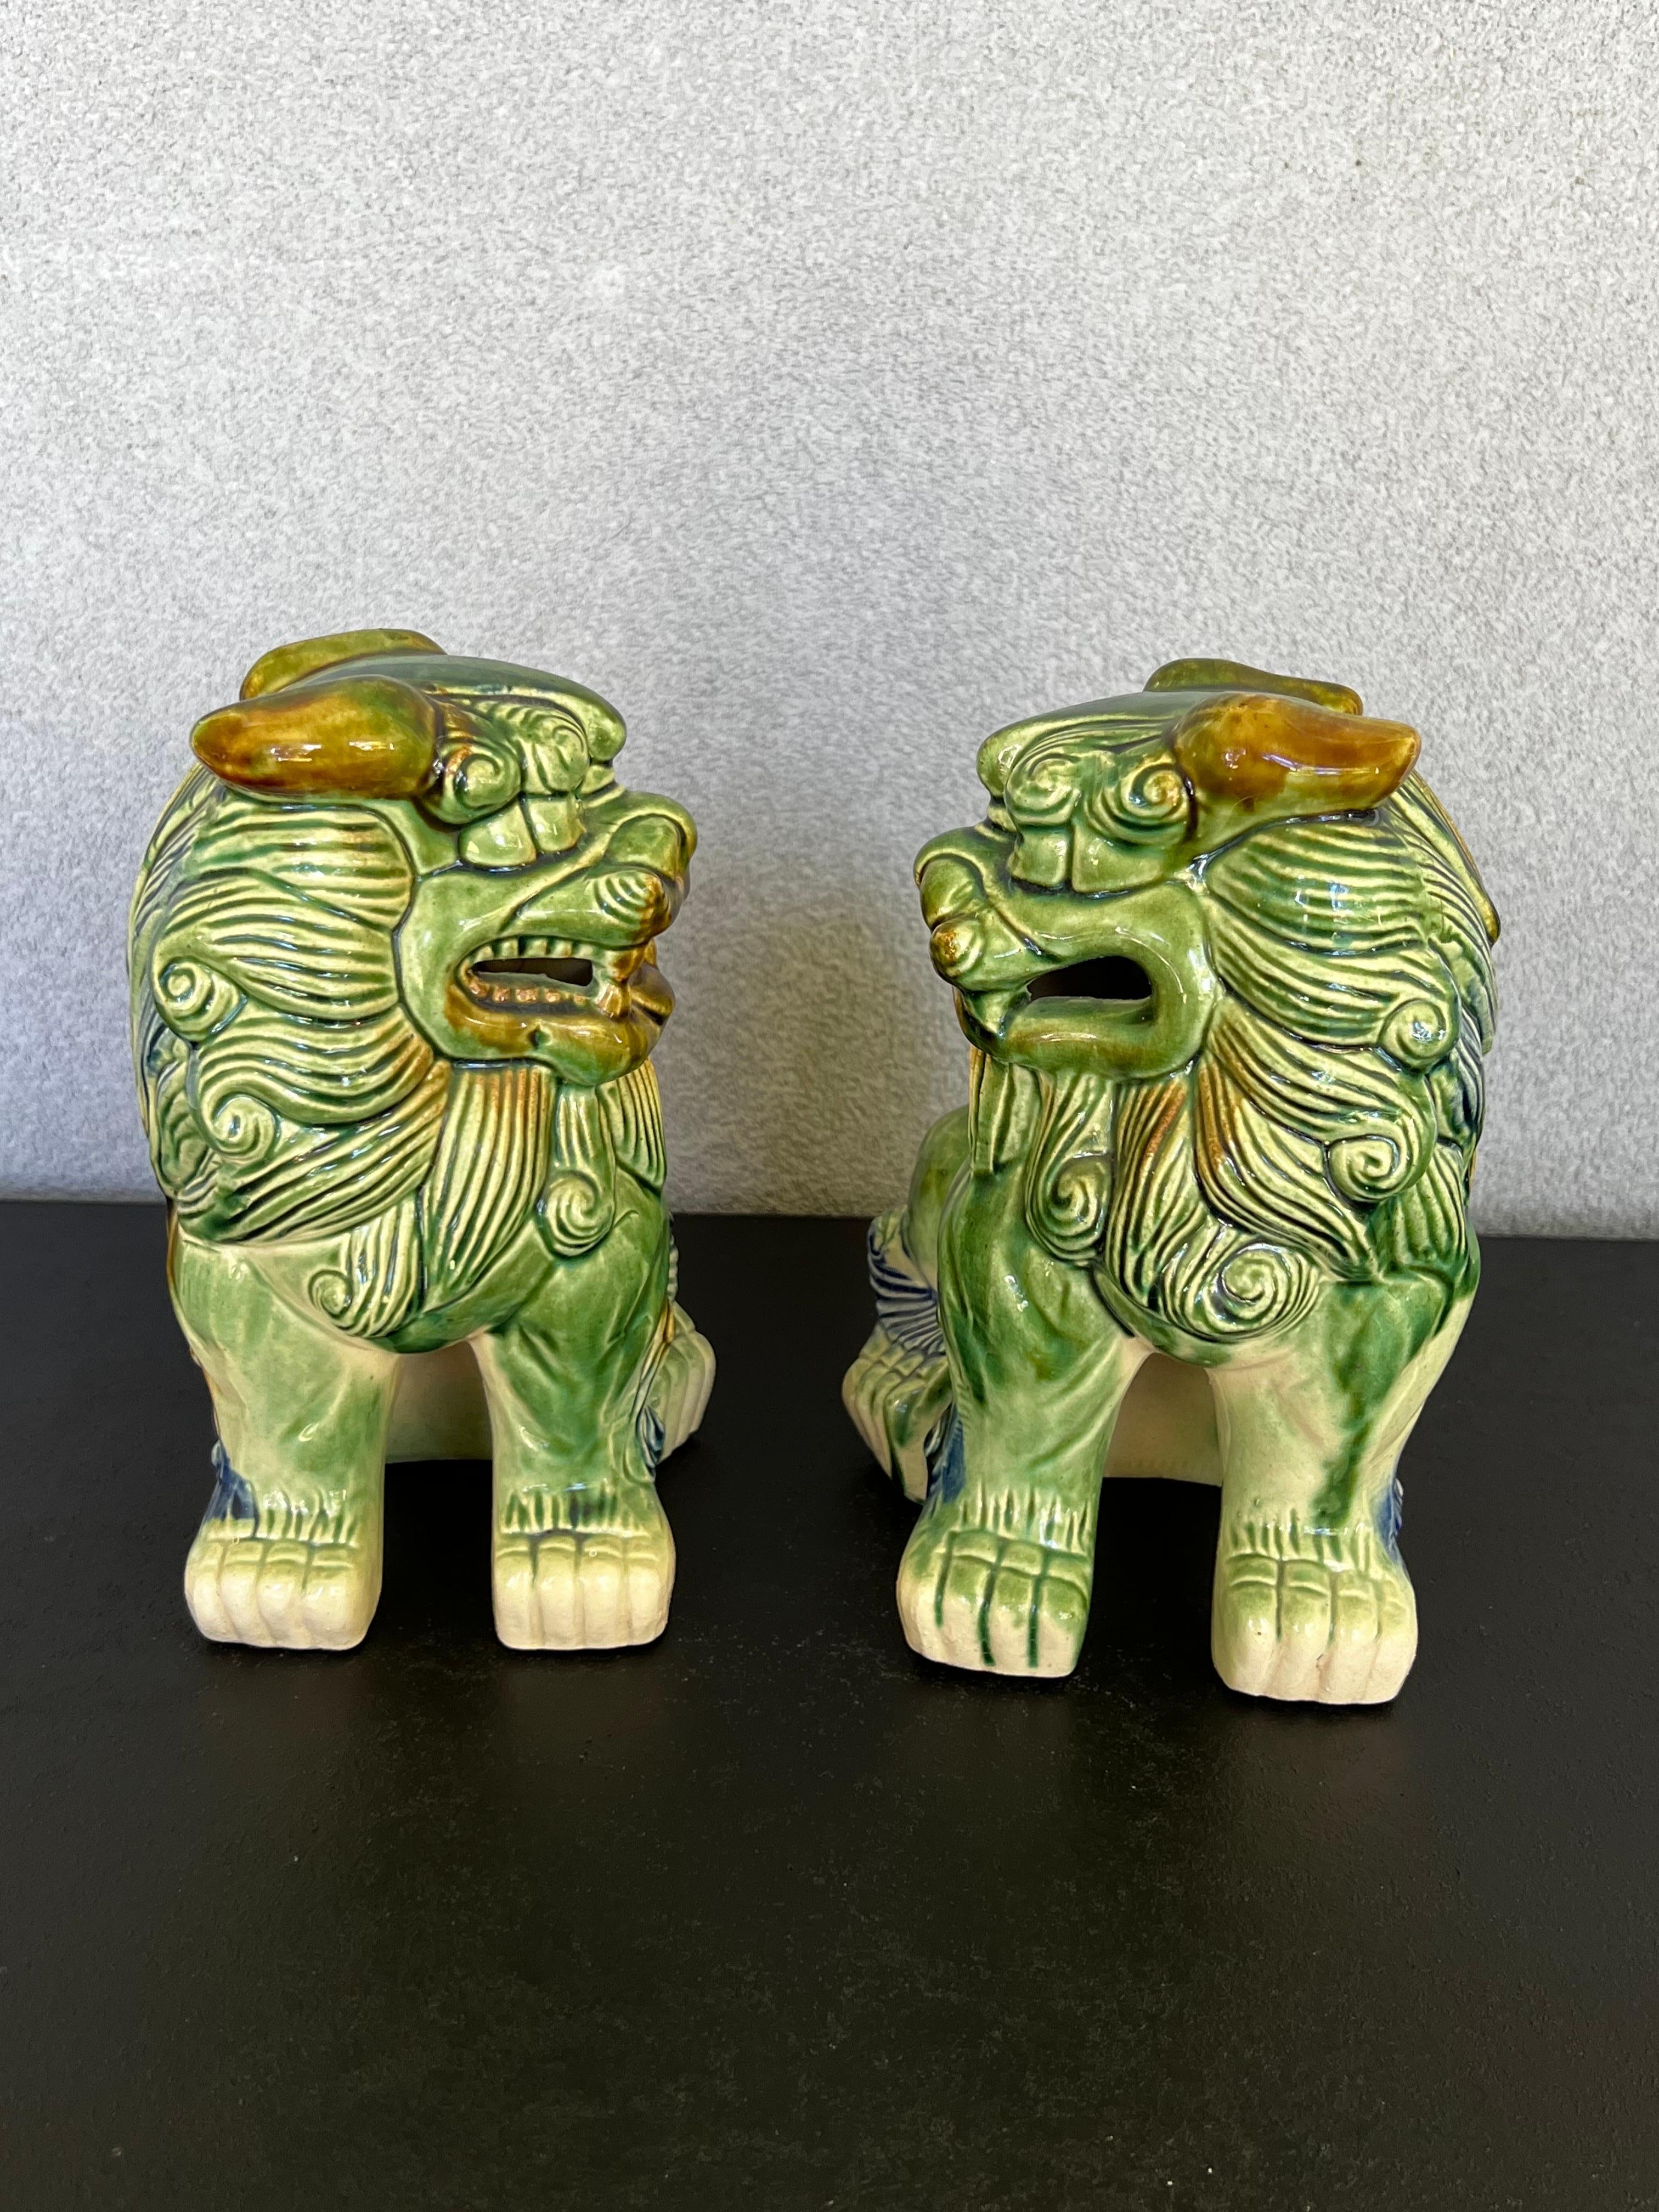 Vintage Pair of Ceramic Glaze Polychrome Chinese foo dog sculptures. Features a color palette of cream, green blue and brown.
this pair has a nice size that could be use on a fireplace mantle or entry table. Colors are rich and vibrant 